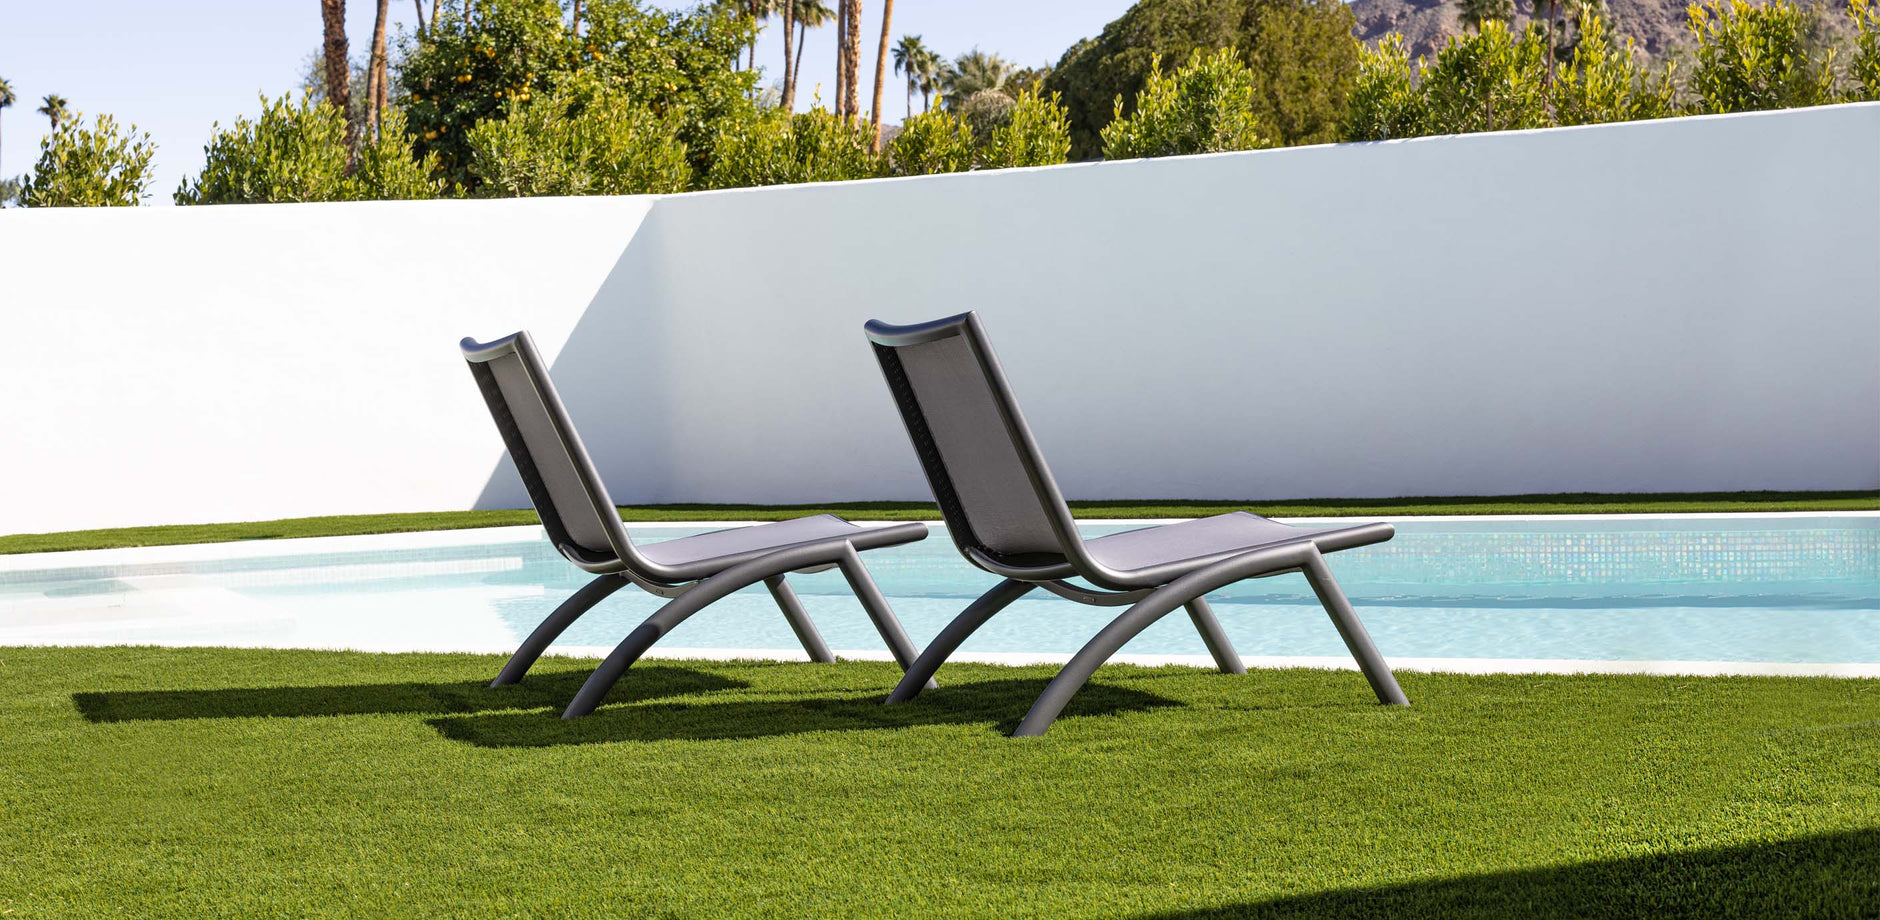 gray lounge chairs by the pool